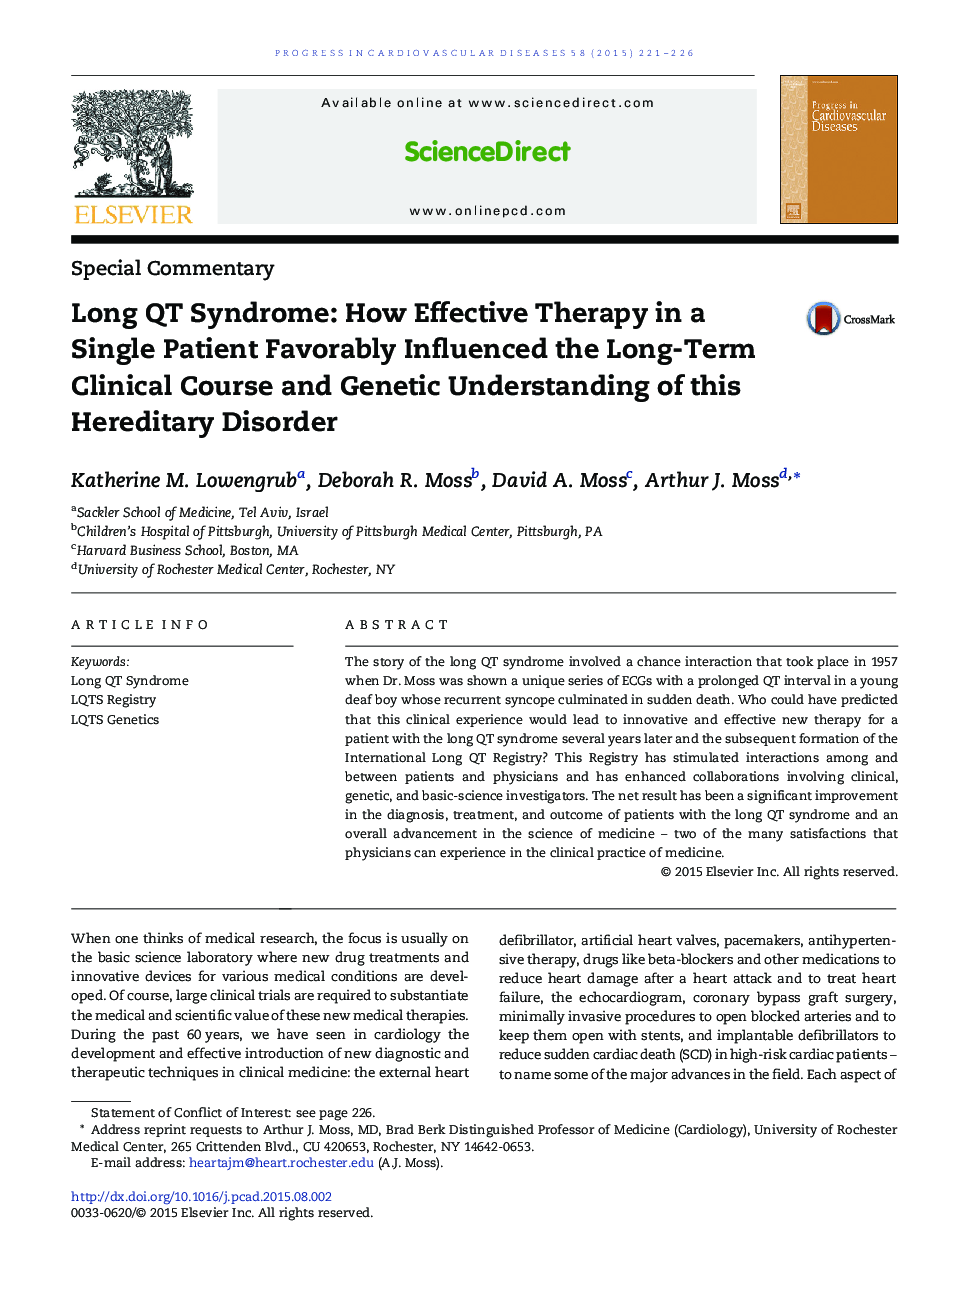 Long QT Syndrome: How Effective Therapy in a Single Patient Favorably Influenced the Long-Term Clinical Course and Genetic Understanding of this Hereditary Disorder 